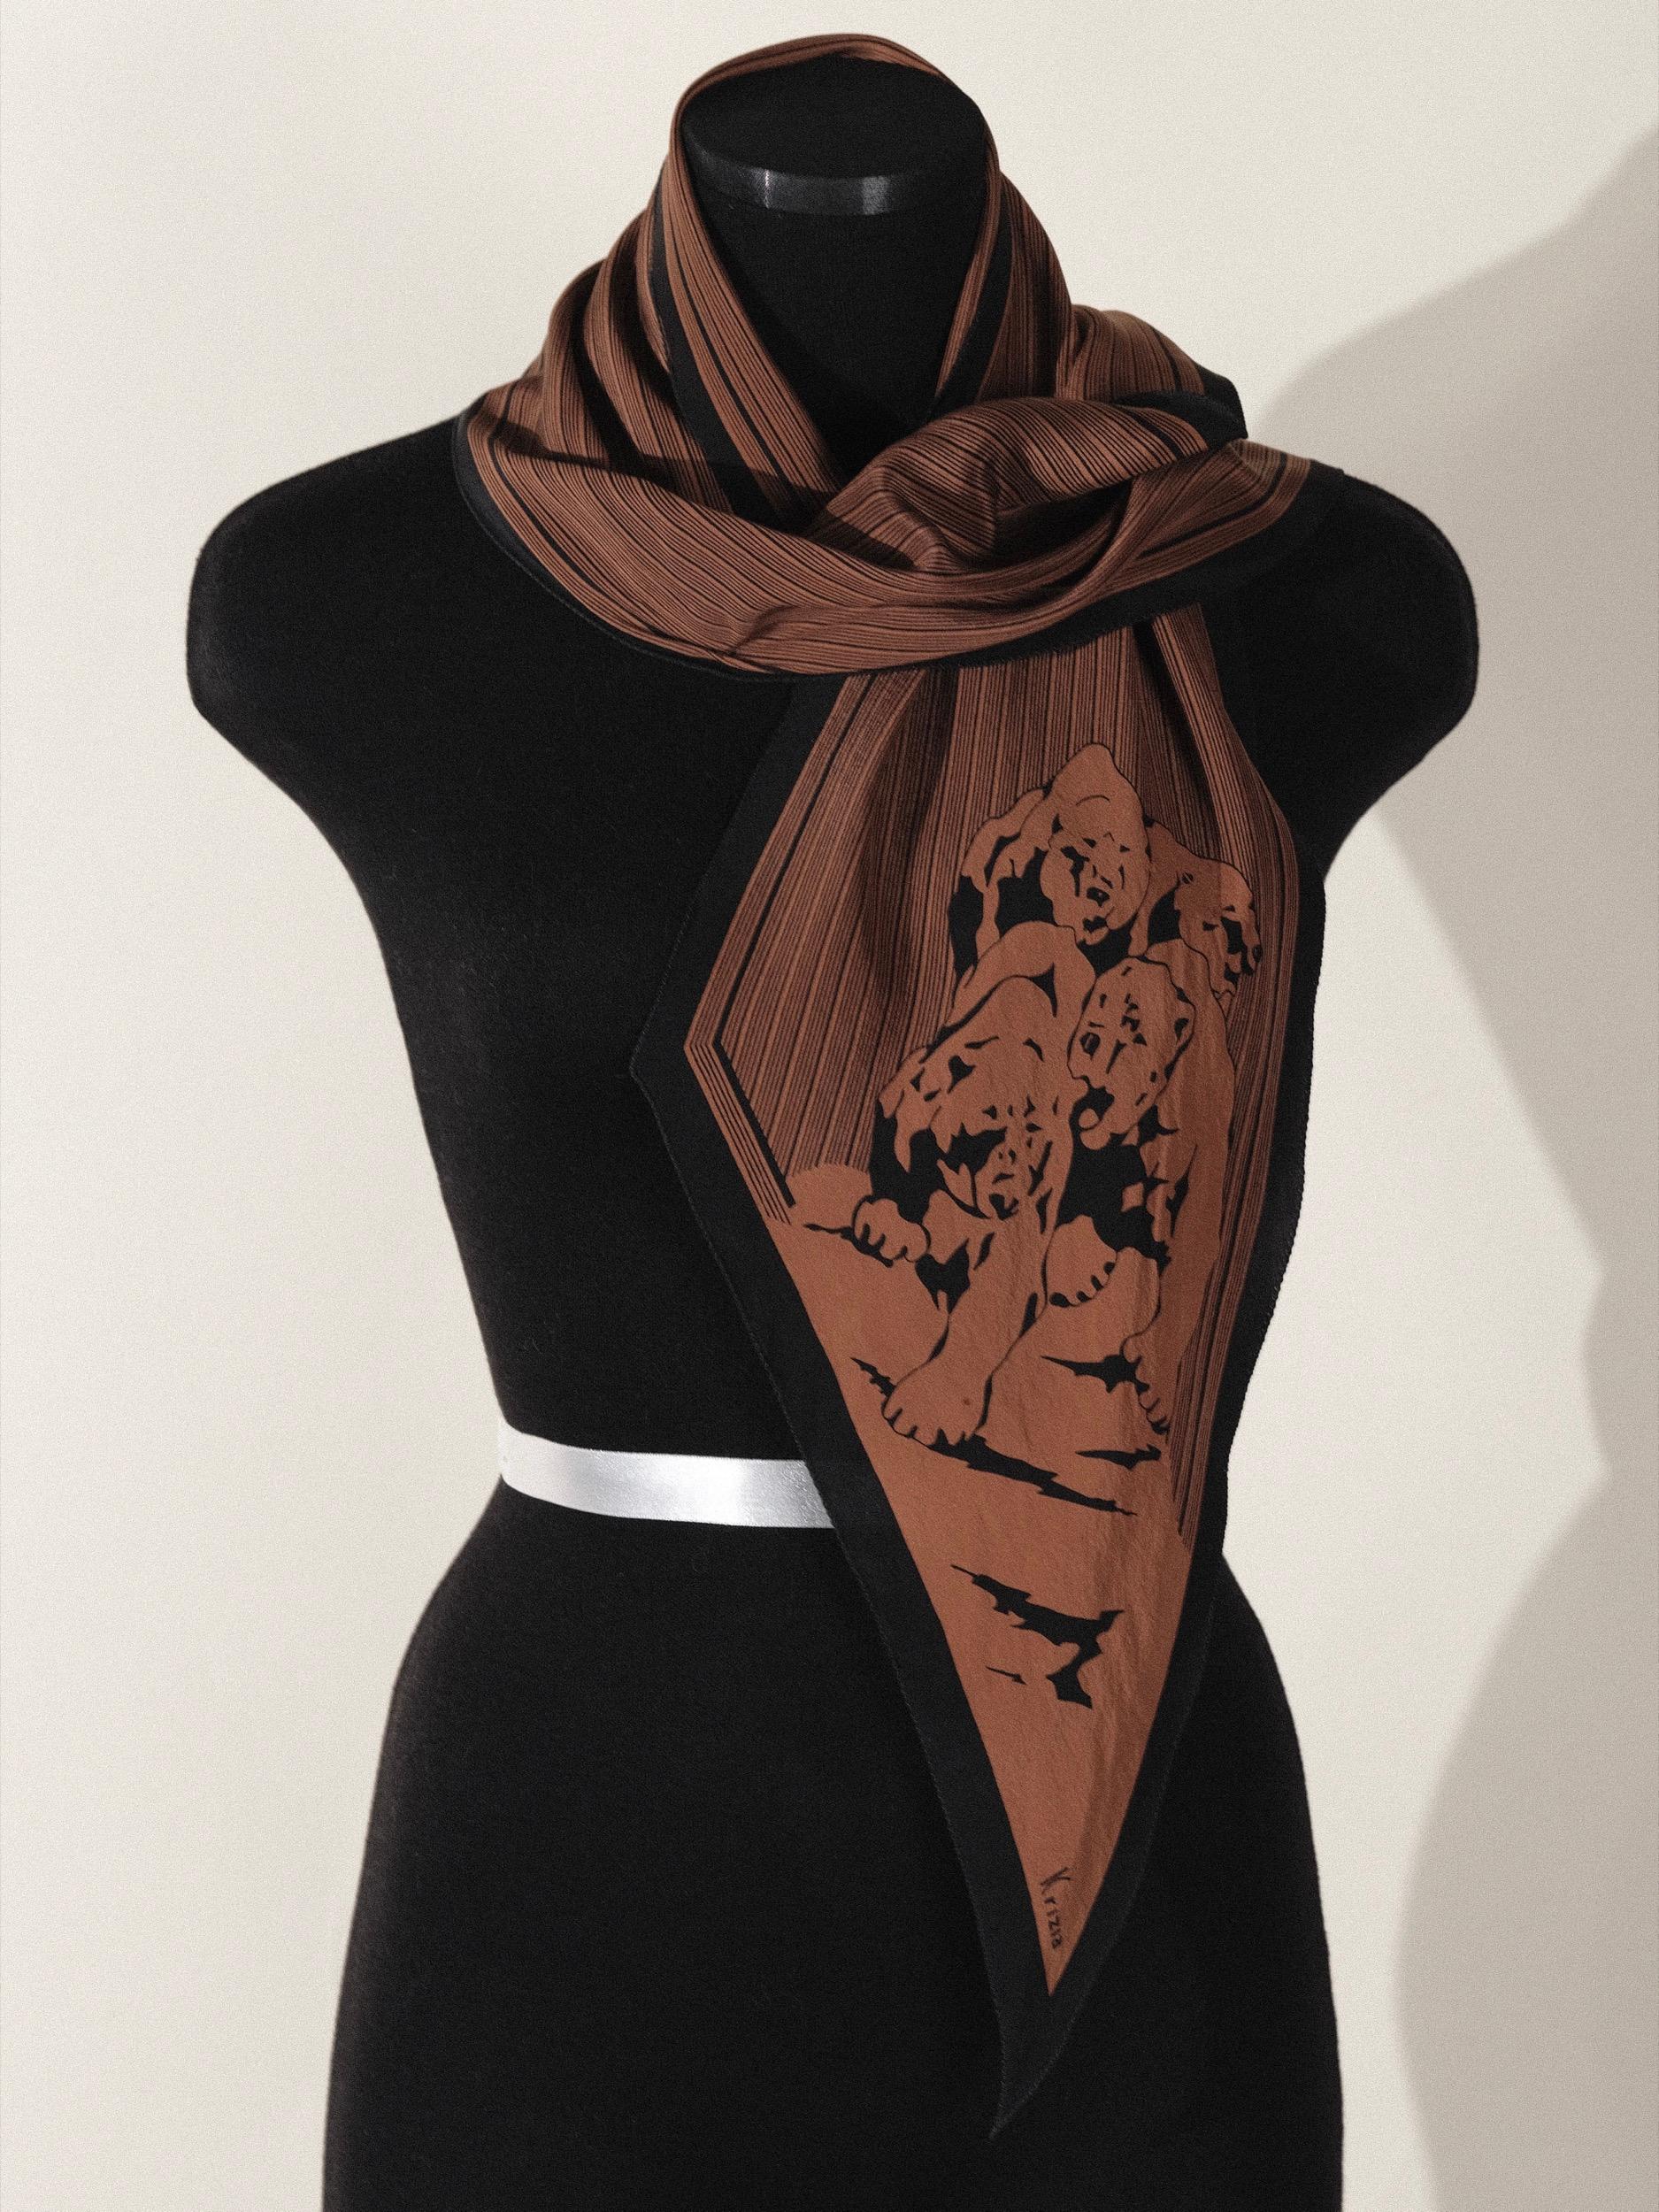 1980's or 1990's Krizia Bear Motif Scarf
Long thin style
Bears and stripes in brown and blacks
65 inches in length
9.25 inches in width
Soft silk Crepe de Chine, slightly matte
Hand-rolled edge
Fabric tag removed
Small stain on bear's paw